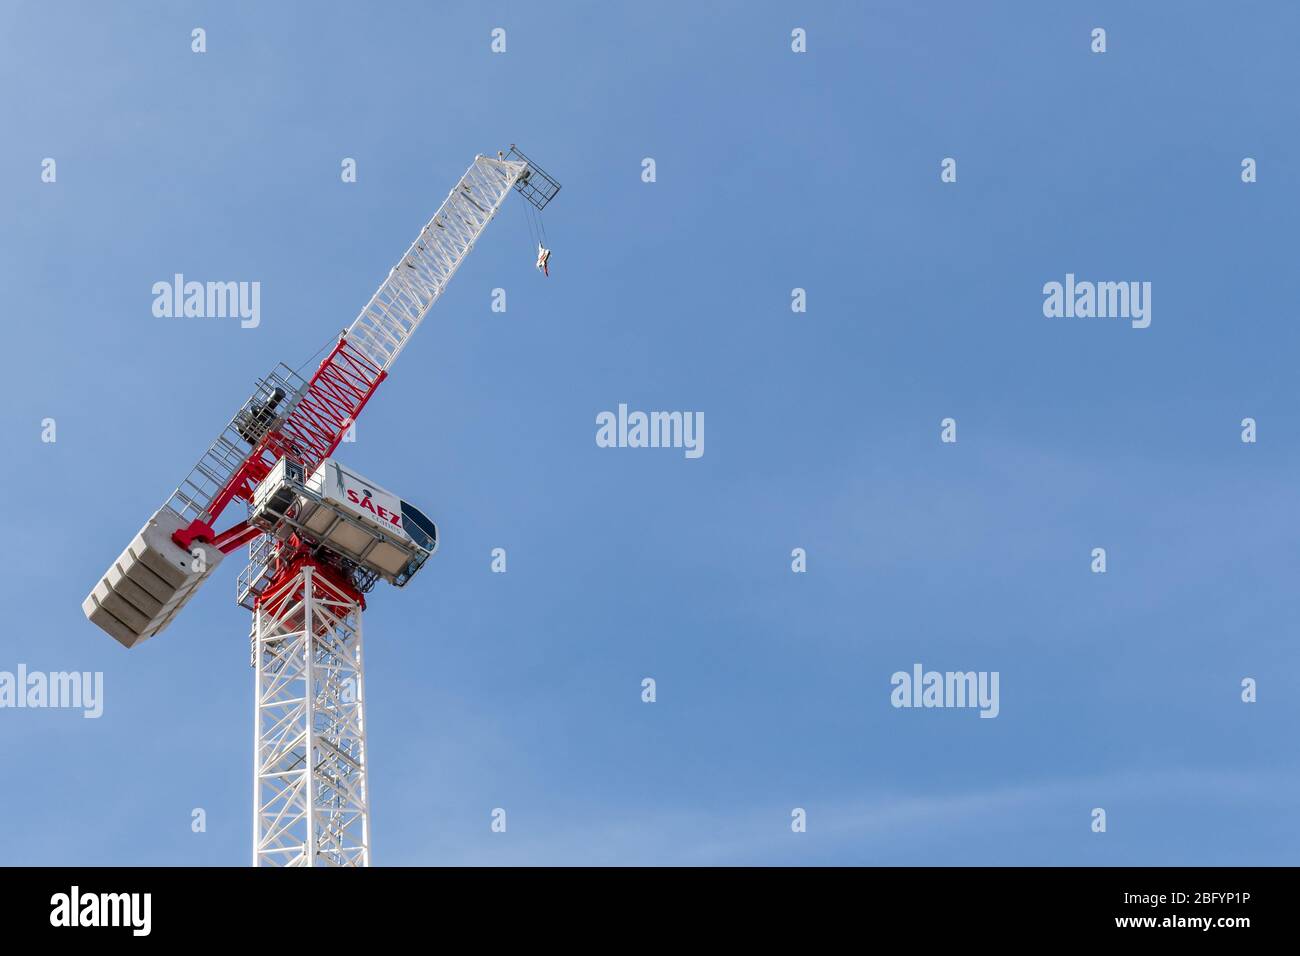 Red and white tower crane against a blue sky. Stock Photo